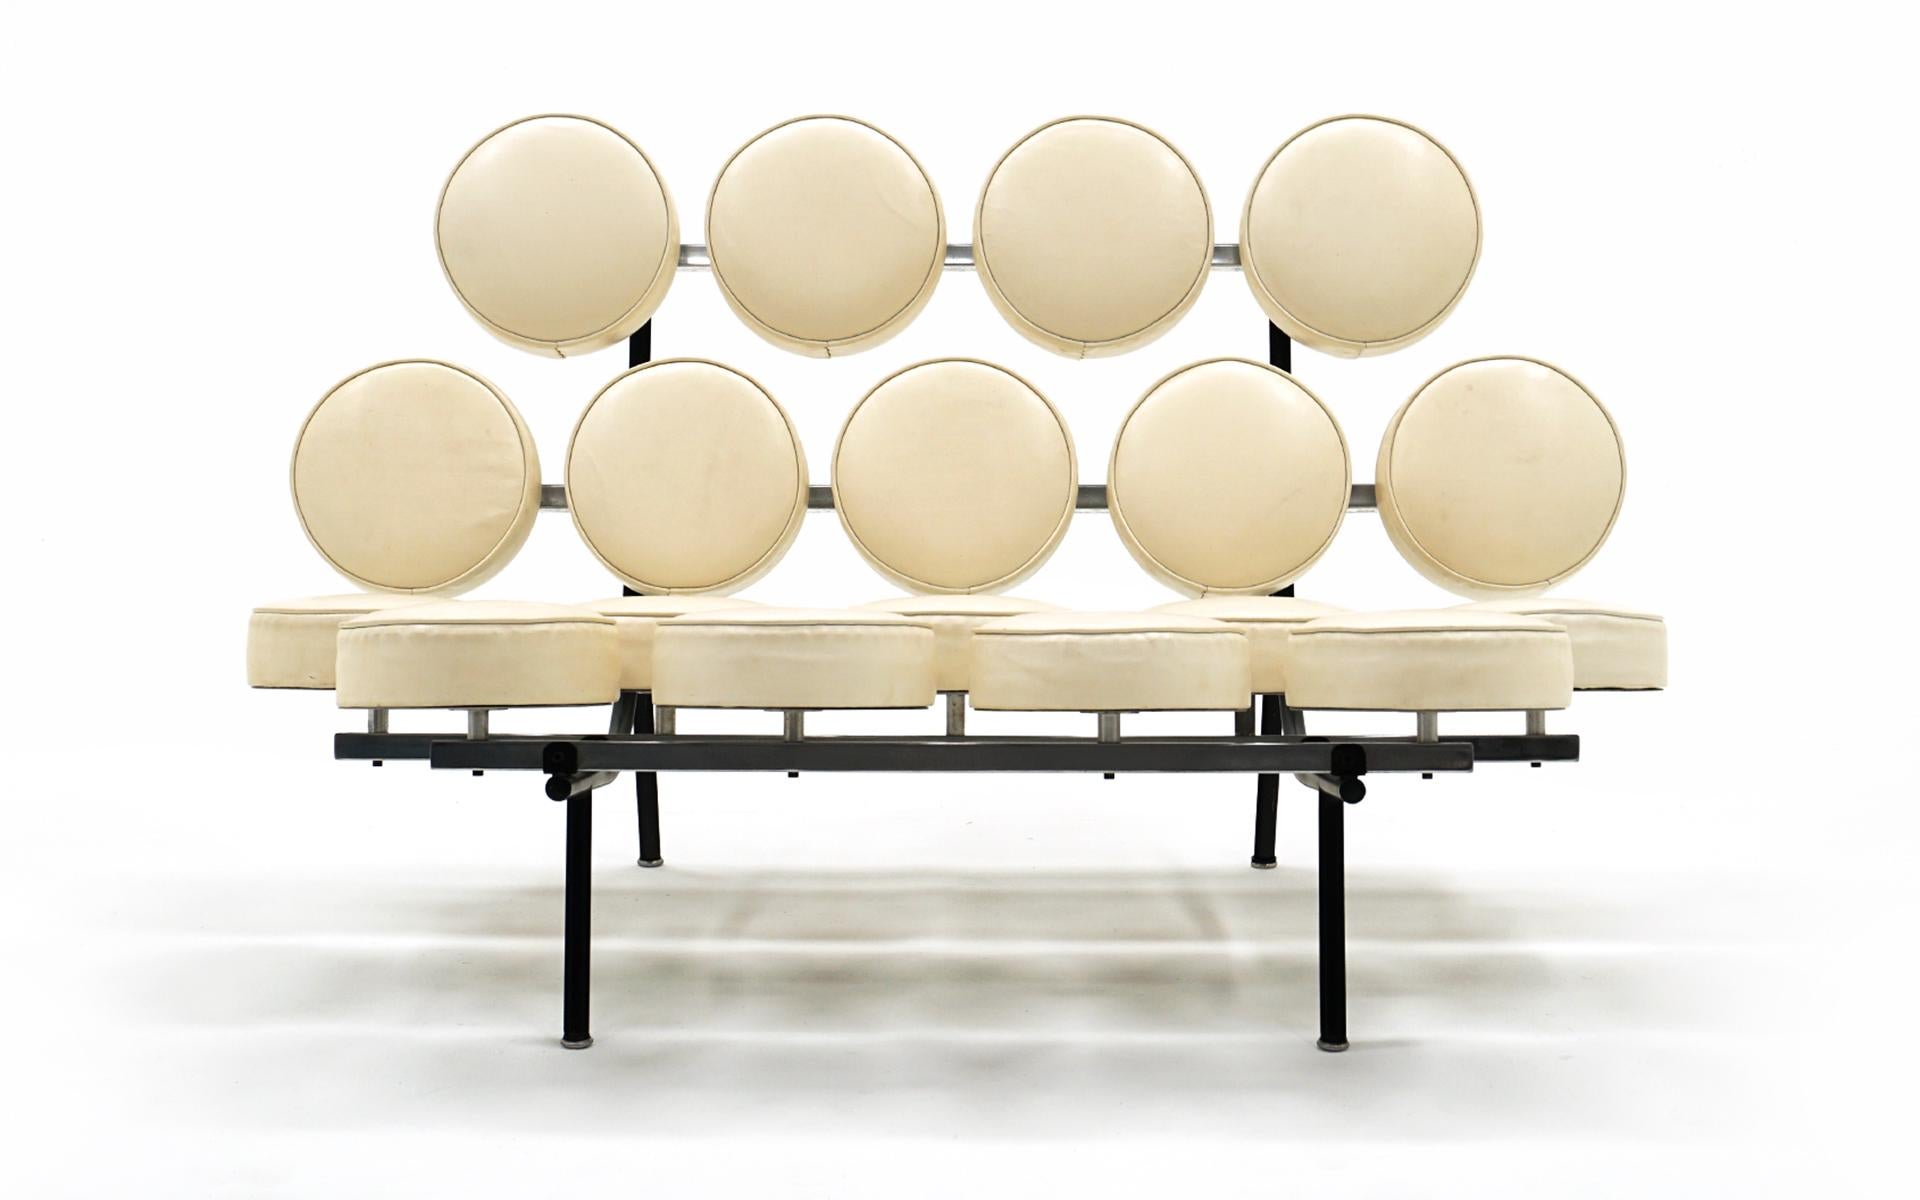 Orignal production iconic Marshmallow Sofa designed by Irving Harper for the George Nelson Office therefore attributed to George Nelson.  Manufactured by Herman Miller and signed who the Herman Miller label.  This fine example has no tears, holes or